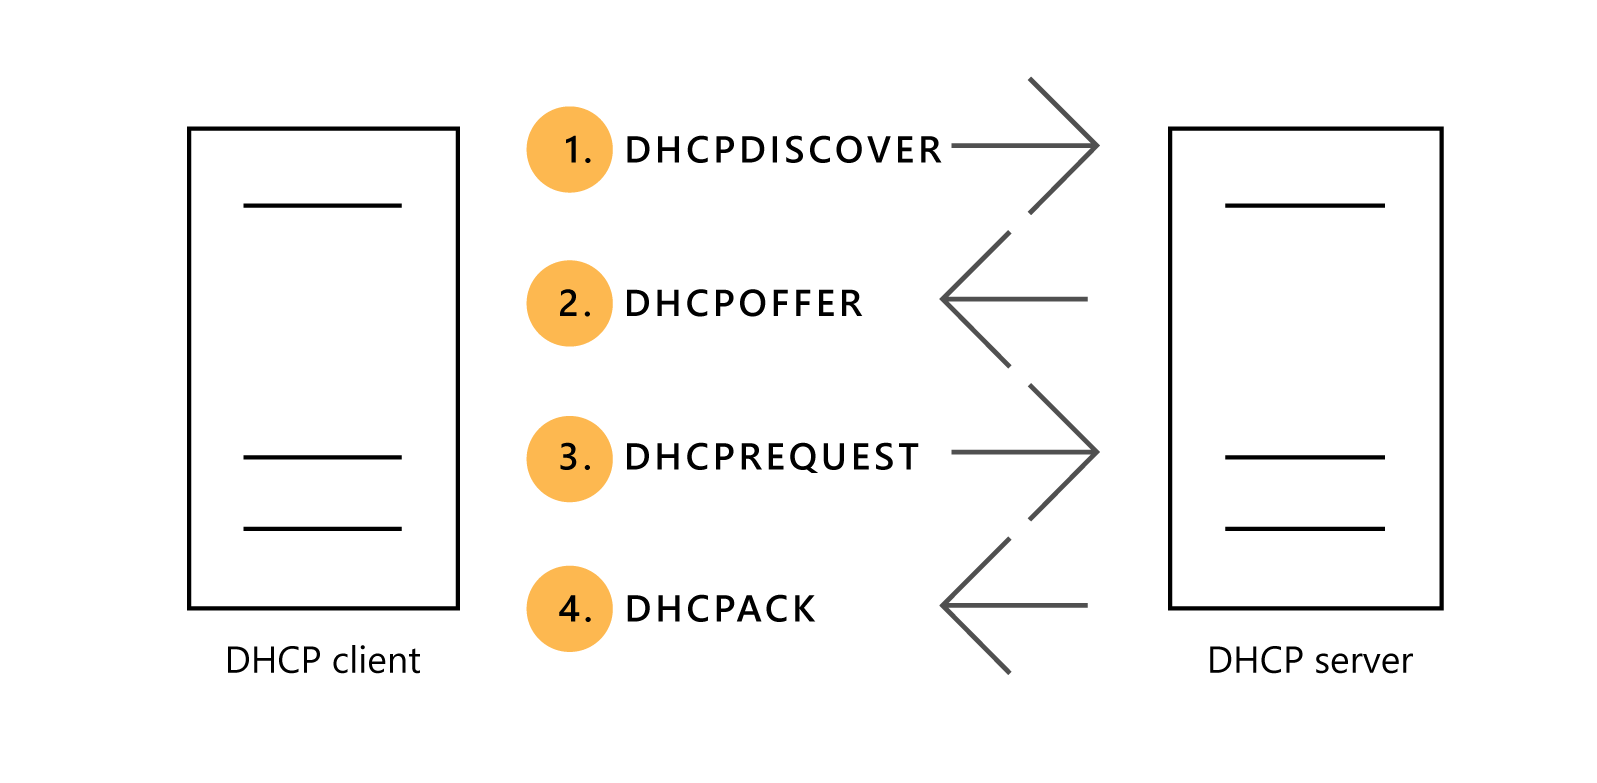 Diagram depicting the communication process between a DHCP server and DHCP client. It consists of DHCPDISCOVER, DHCPOFFER, DHCPREQUEST, and a DHCPACK.